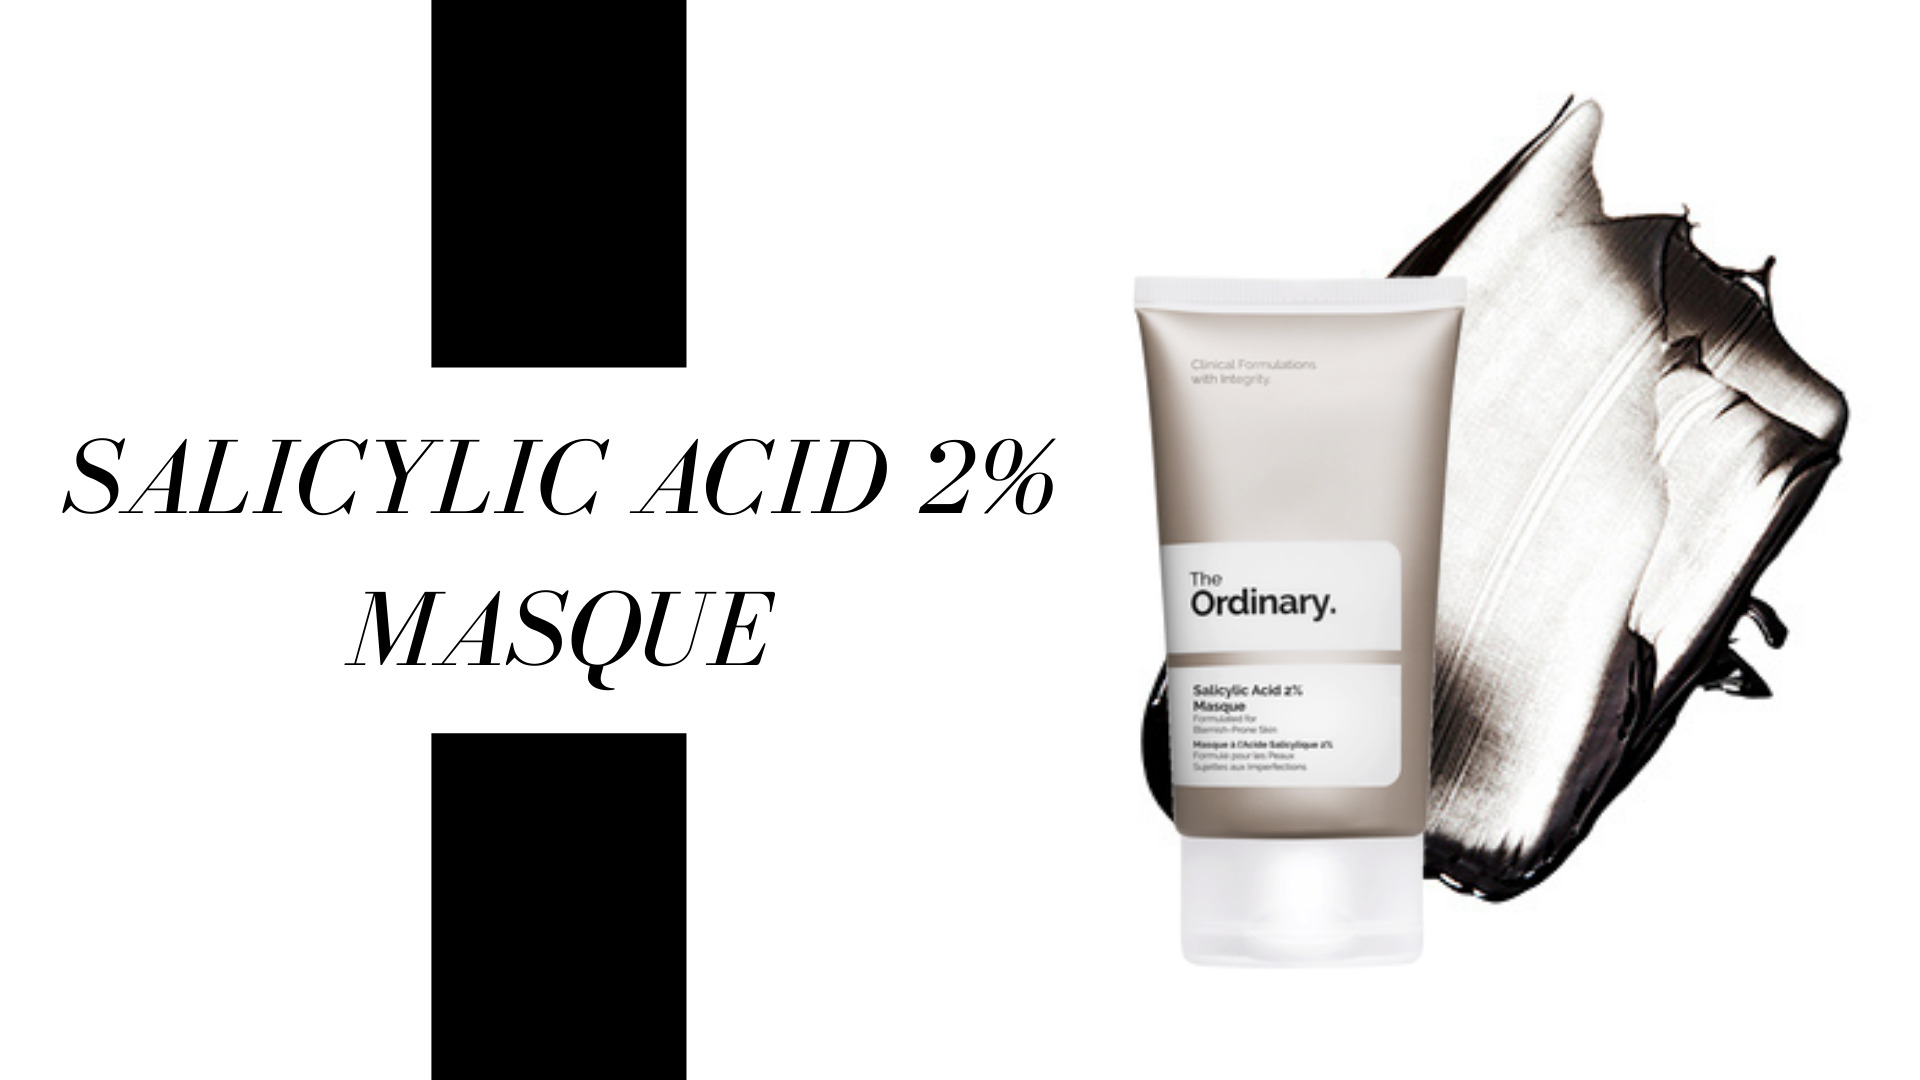 I can't recommend enough this masque with 2% Salicylic Acid, Vegetable Charcoal, Amazonian Clays, and Squalane! It is great!  This formula with charcoal and clays aims to enhance smoothness and clarity, leaving the skin feeling refreshed. This product can reveal a more radiant skin beneath by targeting and removing the dead skin cells on the surface of oily and blemish-prone skin. This masque is a rinse-off formula. I will recommend using in the PM and leaving it on for no longer than 10 minutes to maximize the exfoliating benefits. 